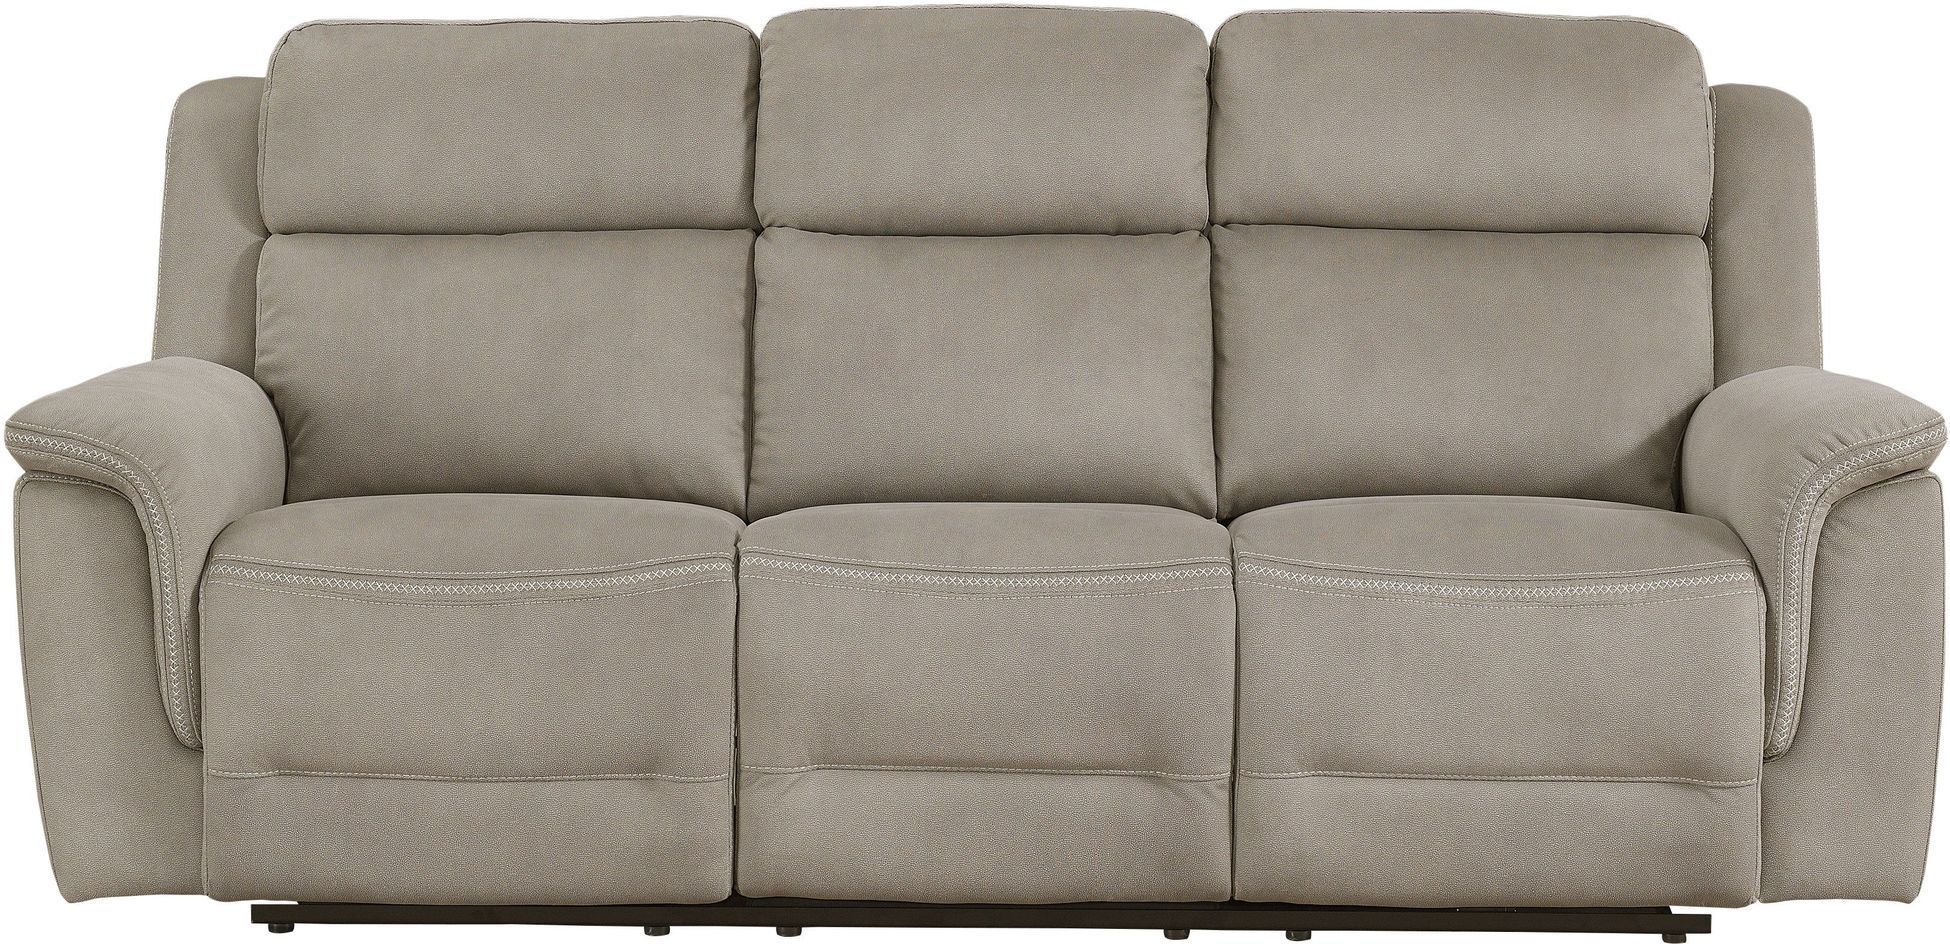 Prime Resources Noah Collection Power Reclining Sofa With Throughout Power Reclining Sofas (View 2 of 15)